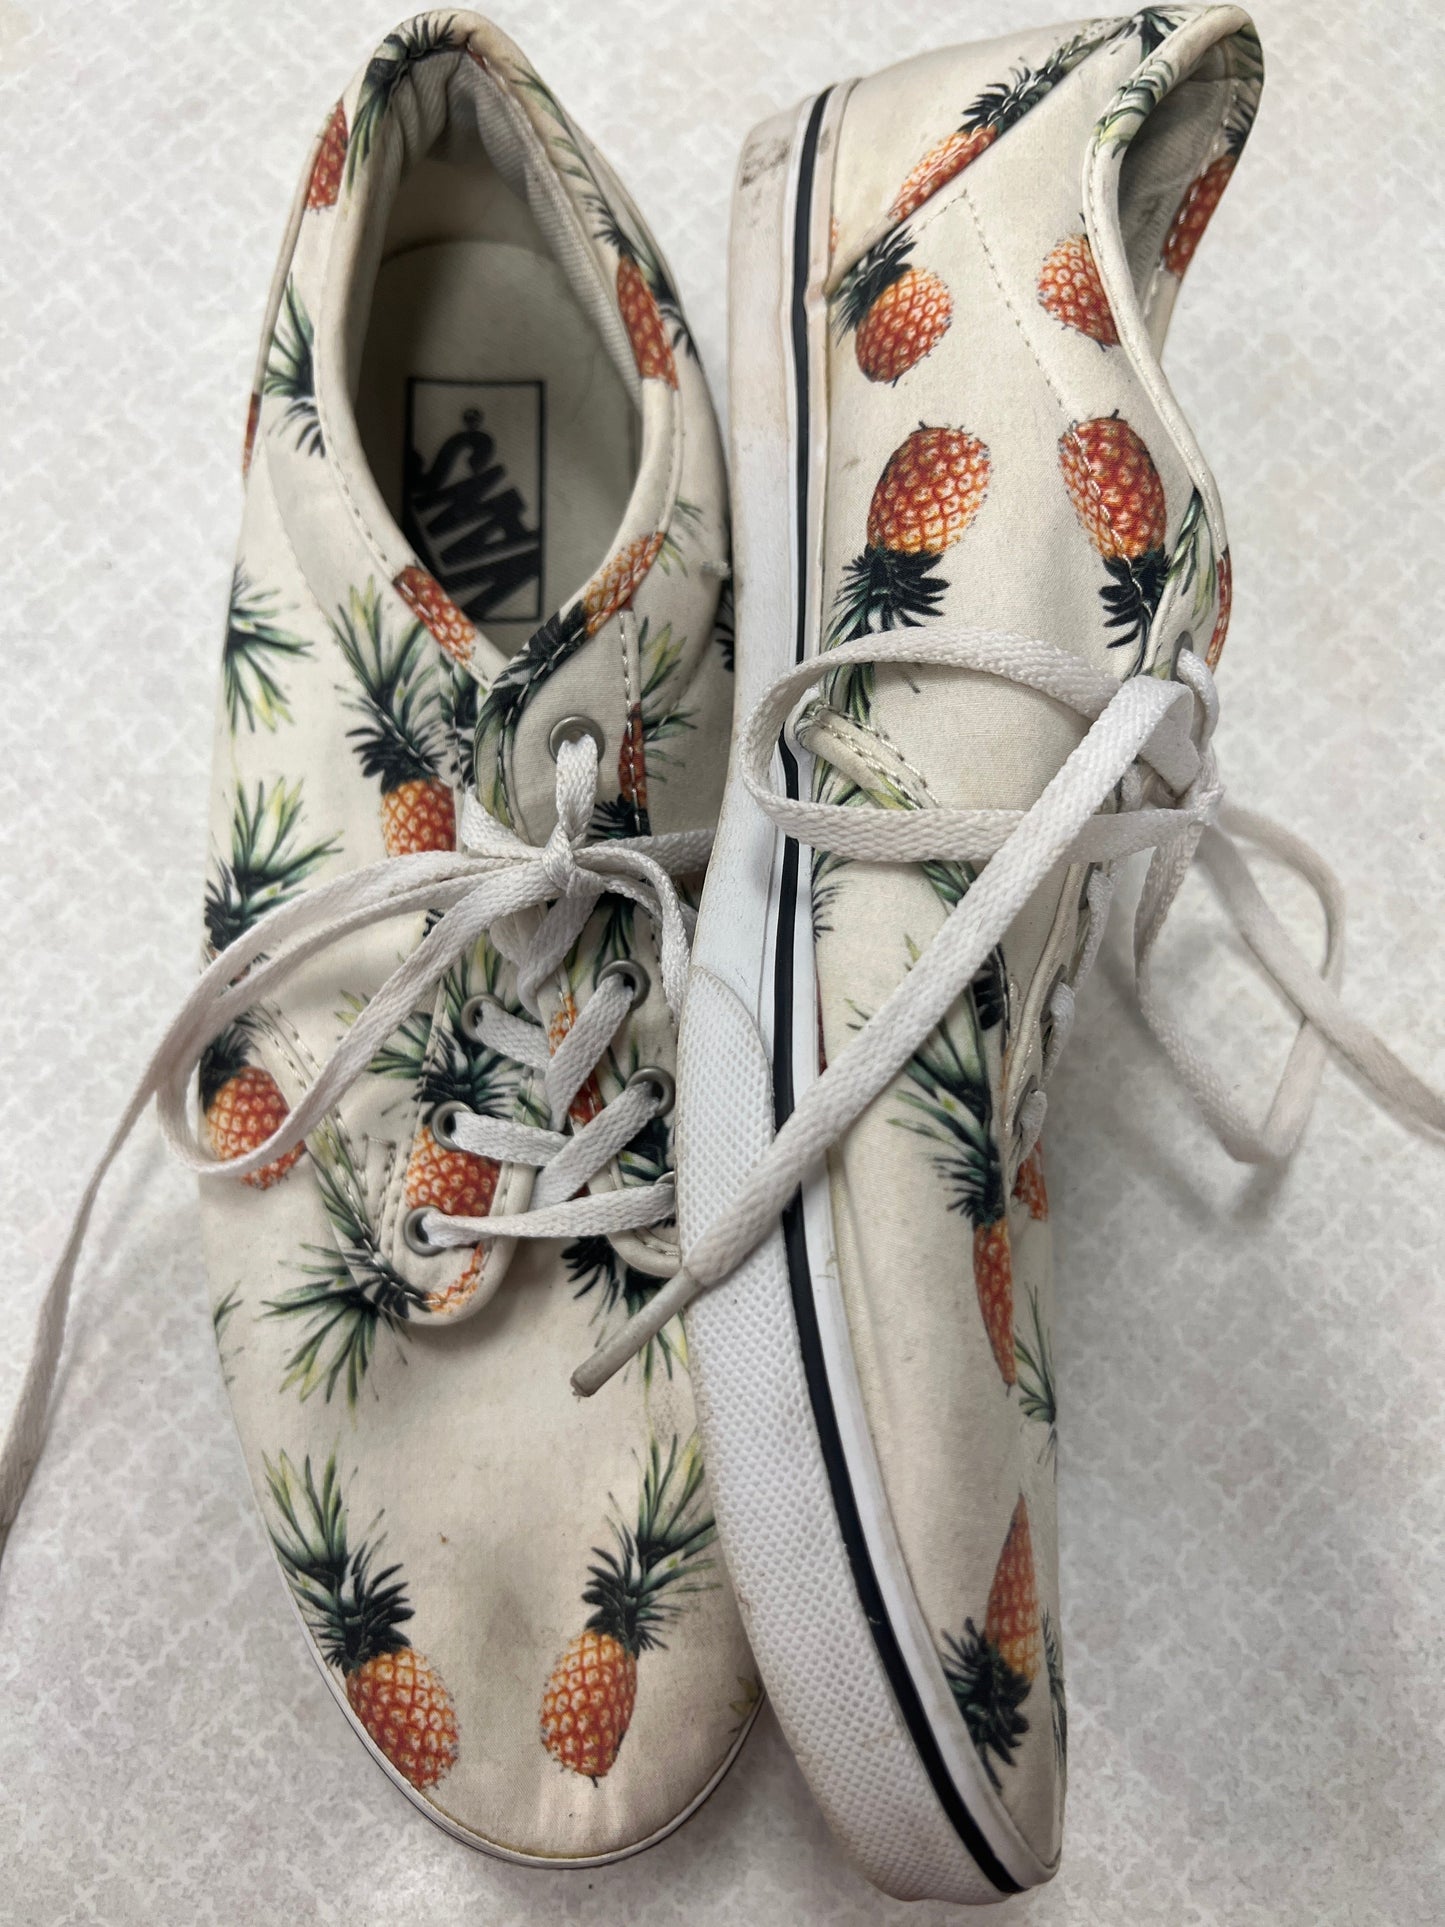 Shoes Flats Boat By Vans  Size: 10